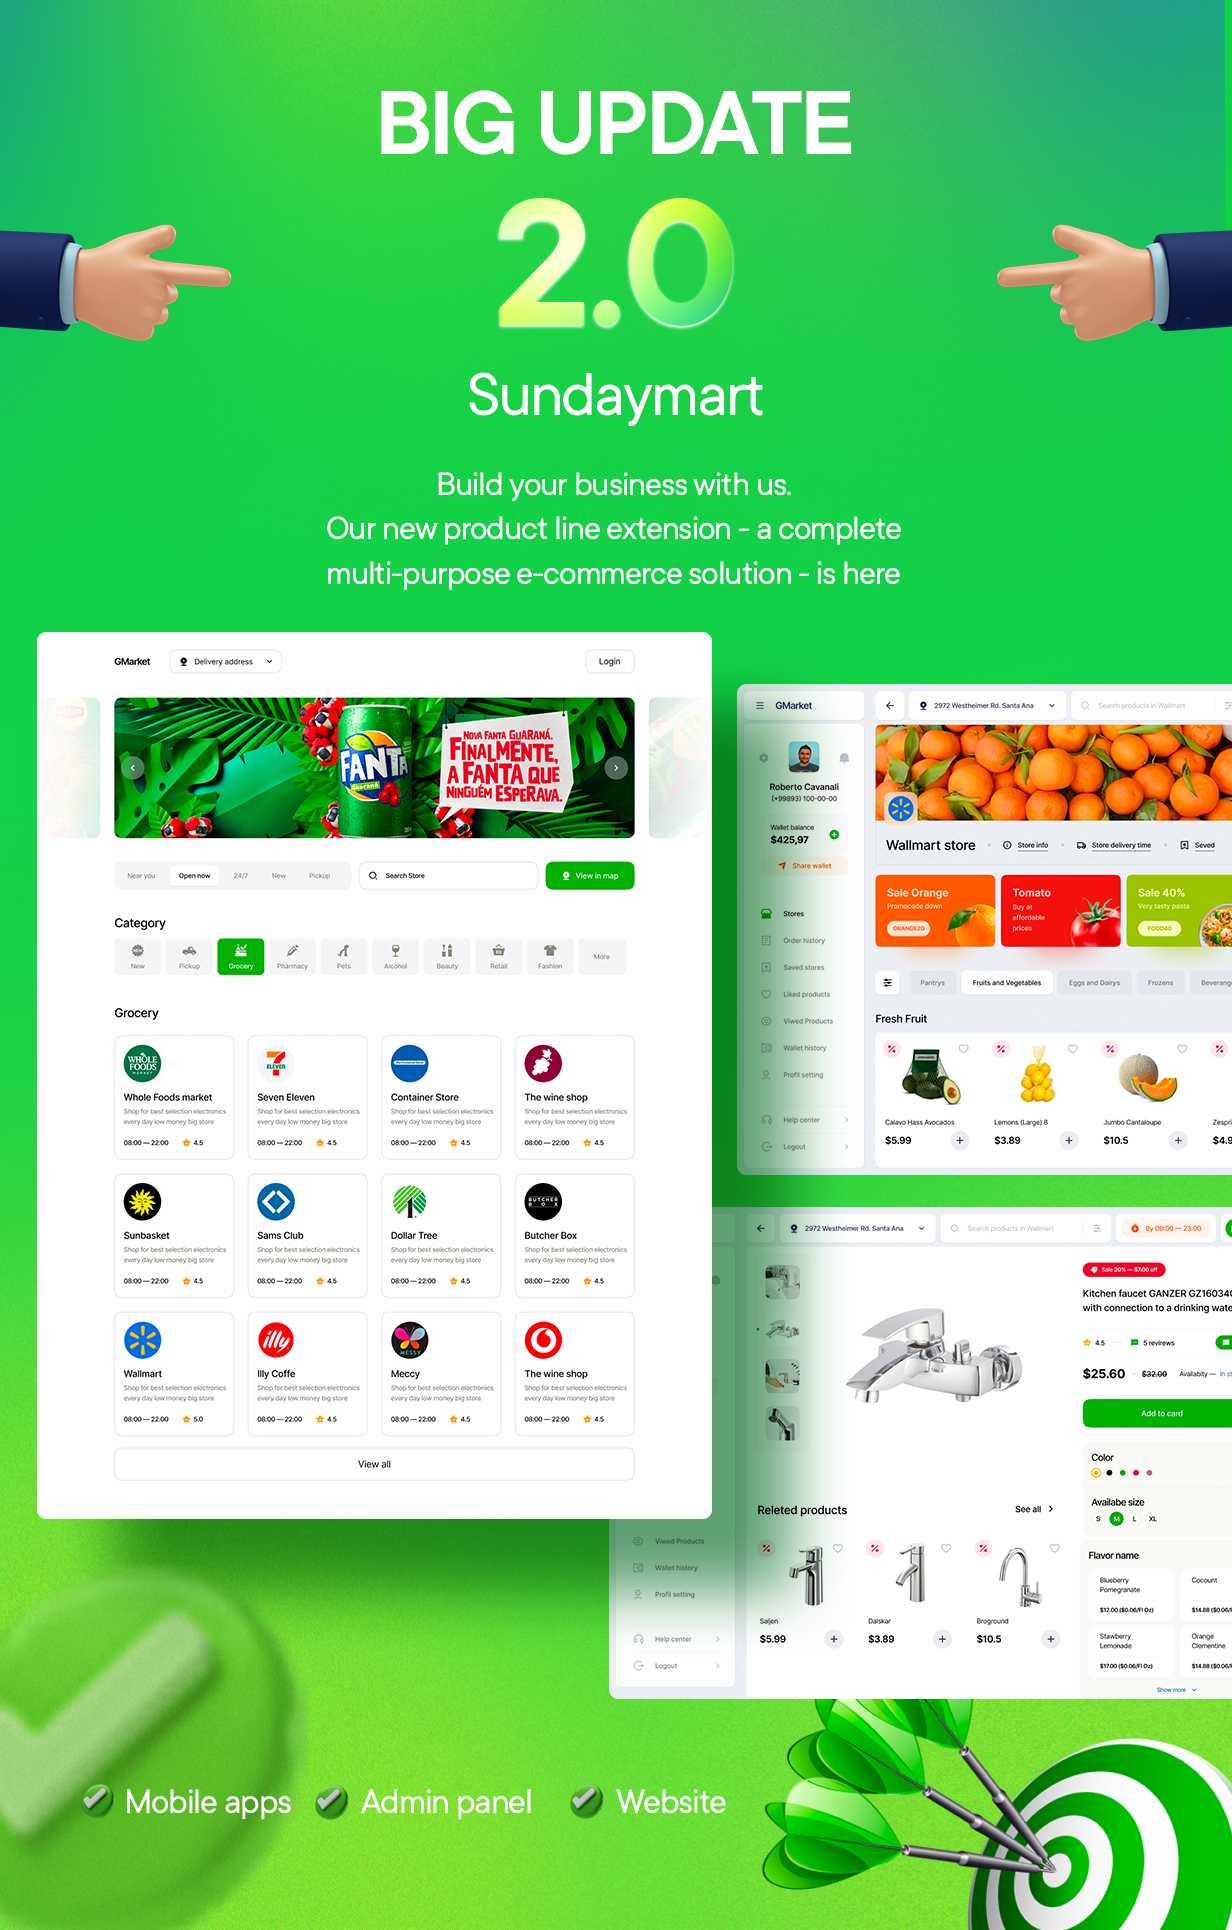 SundayMart - All-in-One Grocery, Pharmacy Multivendor eCommerce (Web, User, Vendor, Delivery) - 10